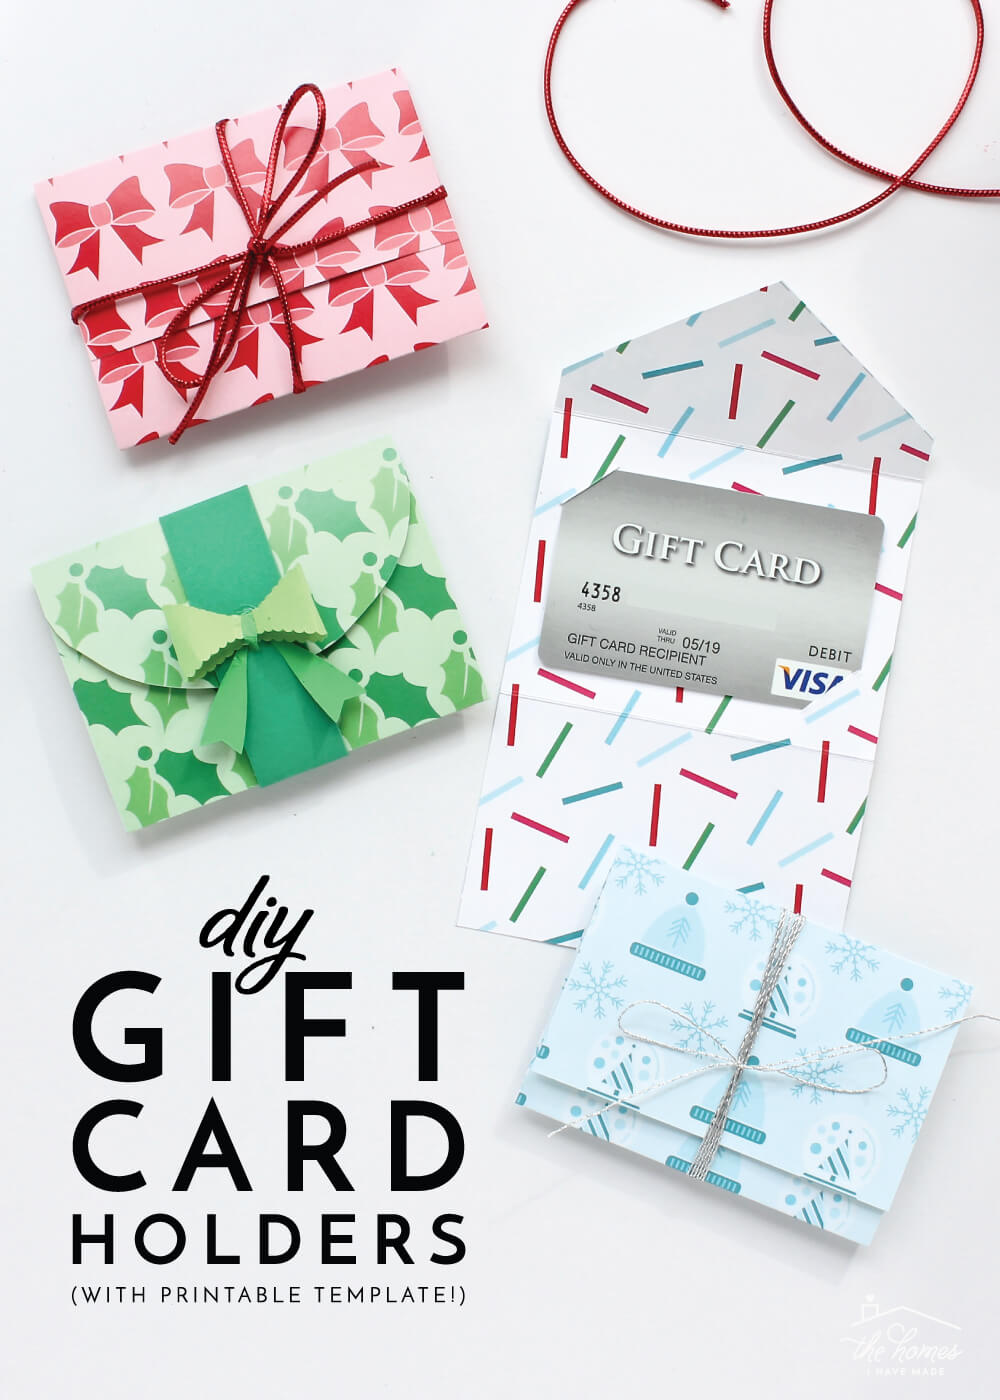 026 Template Ideas Printable Gift Card Diy Holders With 1 With Regard To Diy Christmas Card Templates